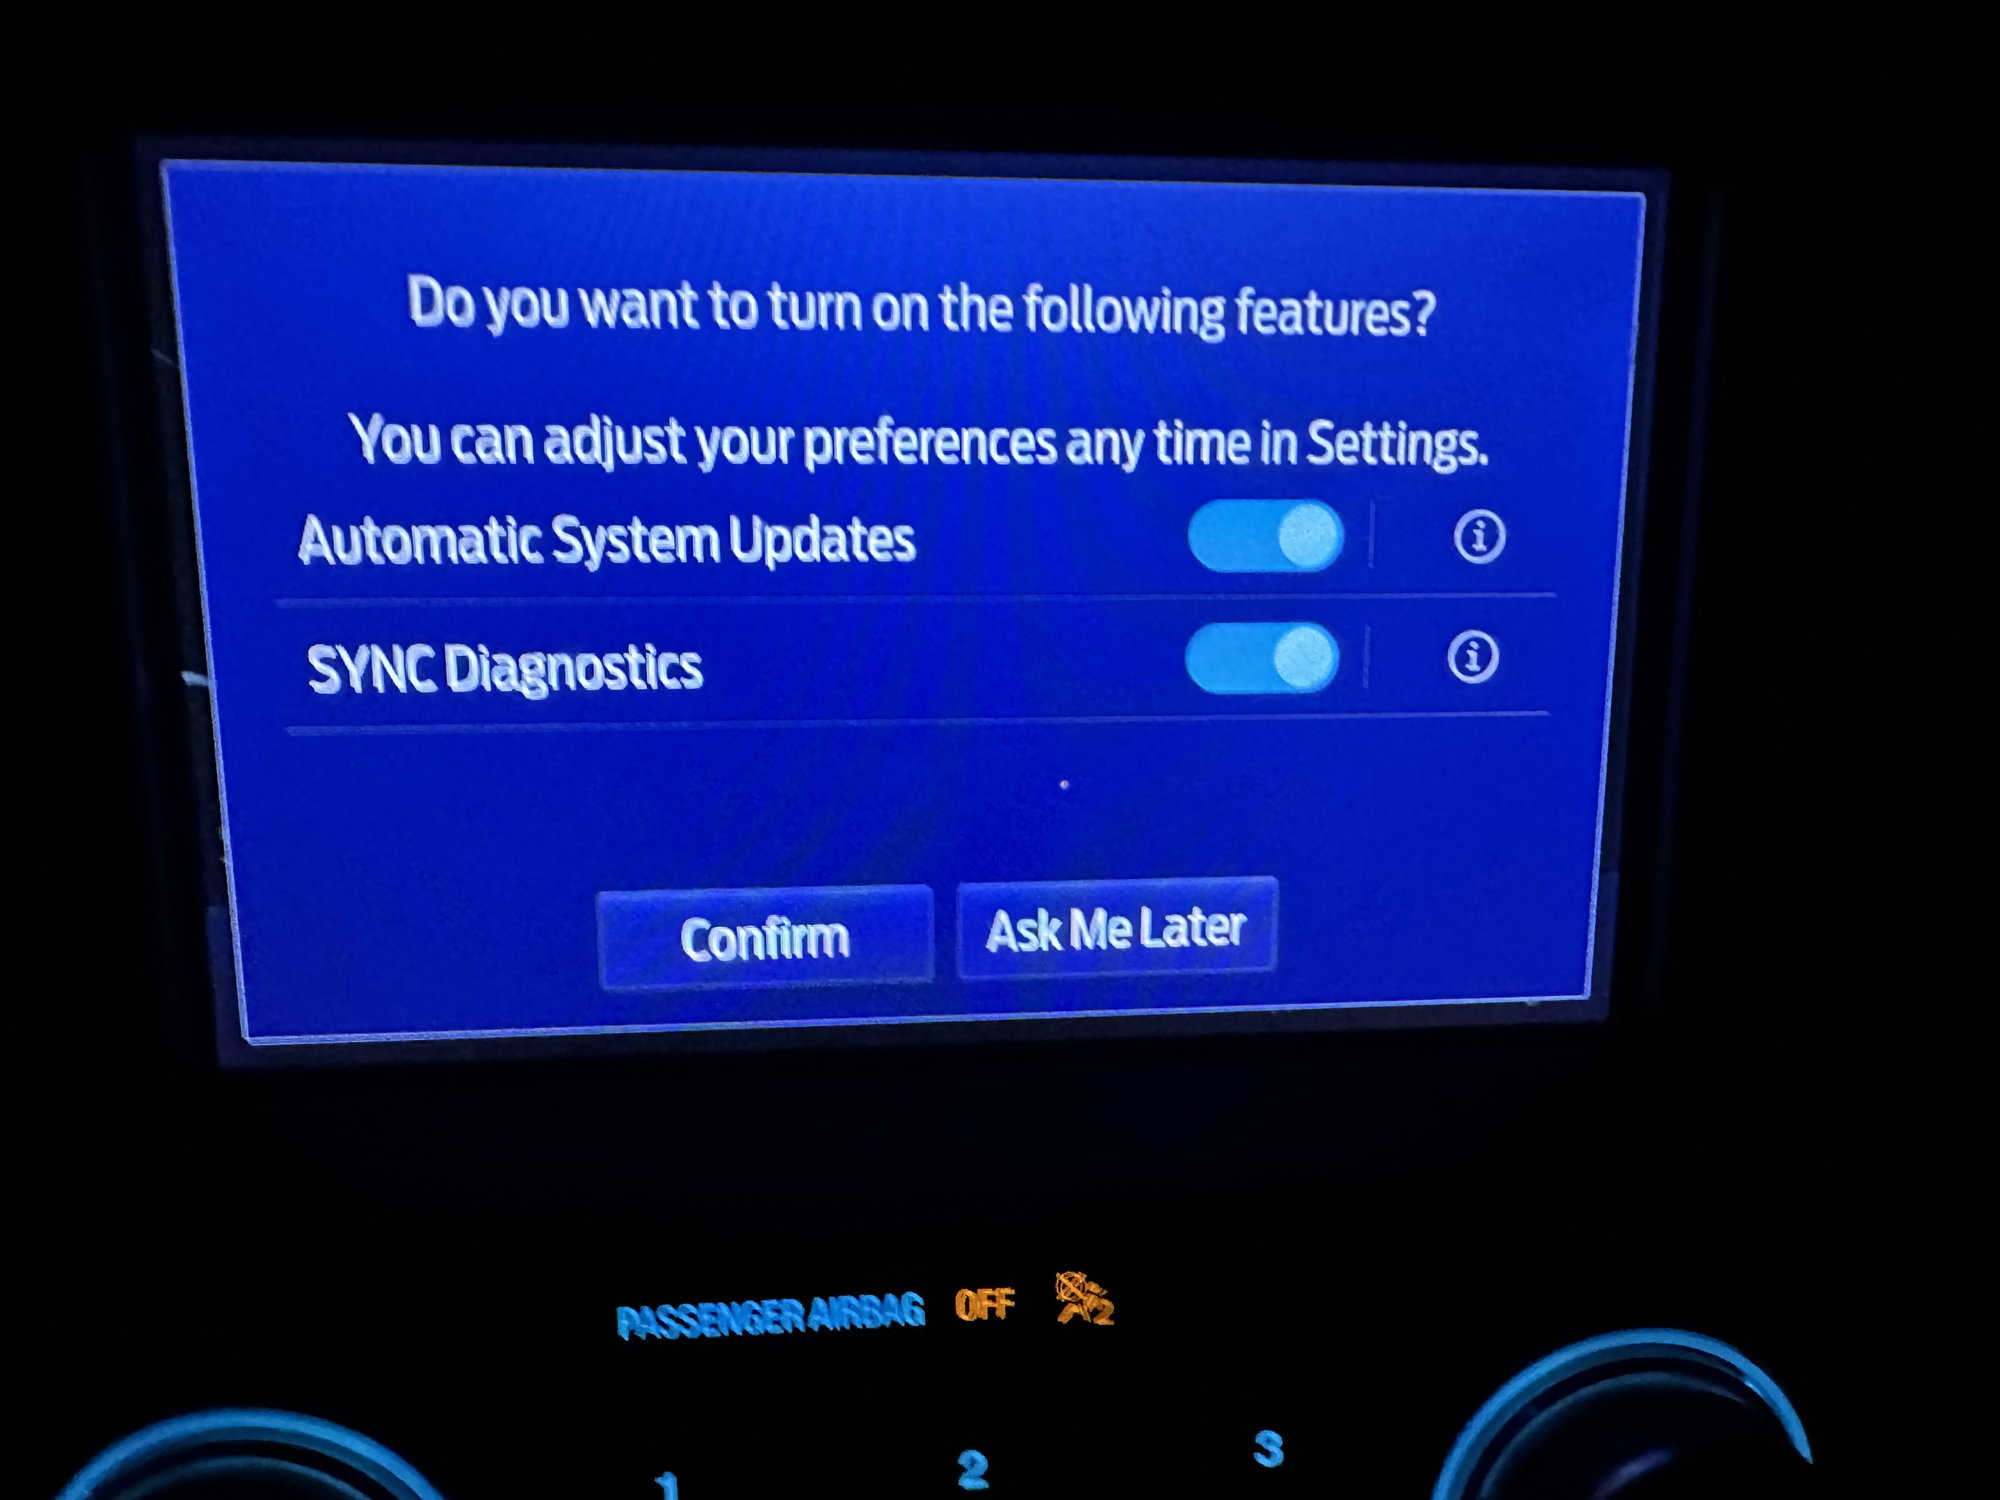 How to Set Preset Radio Stations on Ford® Vehicle Touchscreens